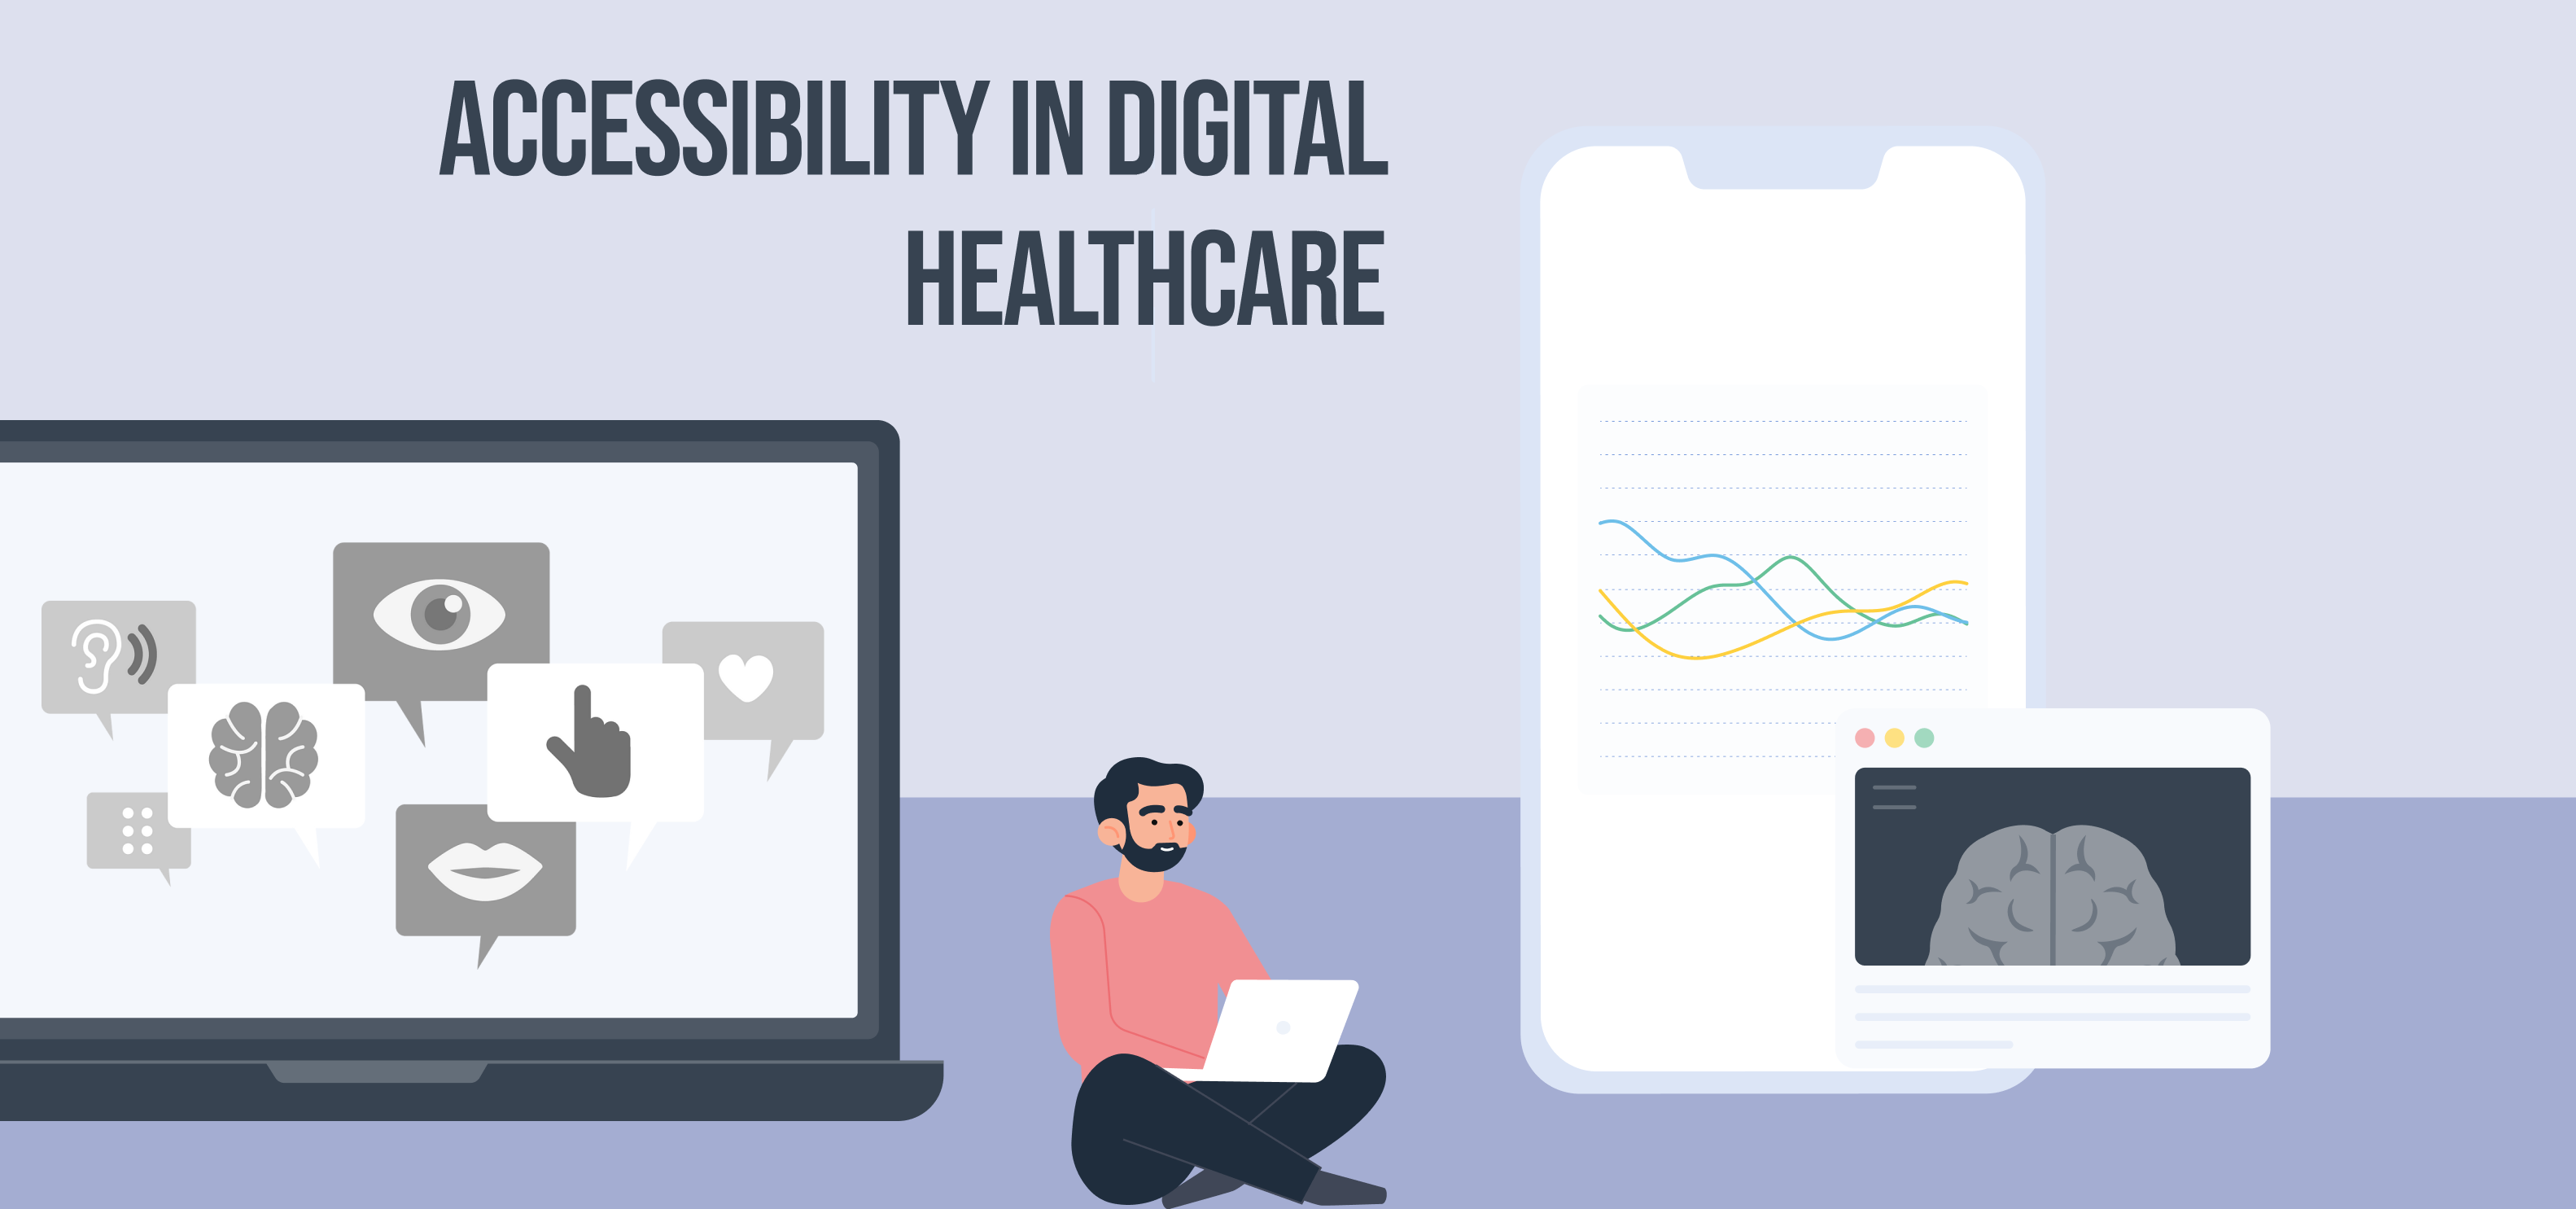 Making Digital Healthcare Products Accessible to Everyone